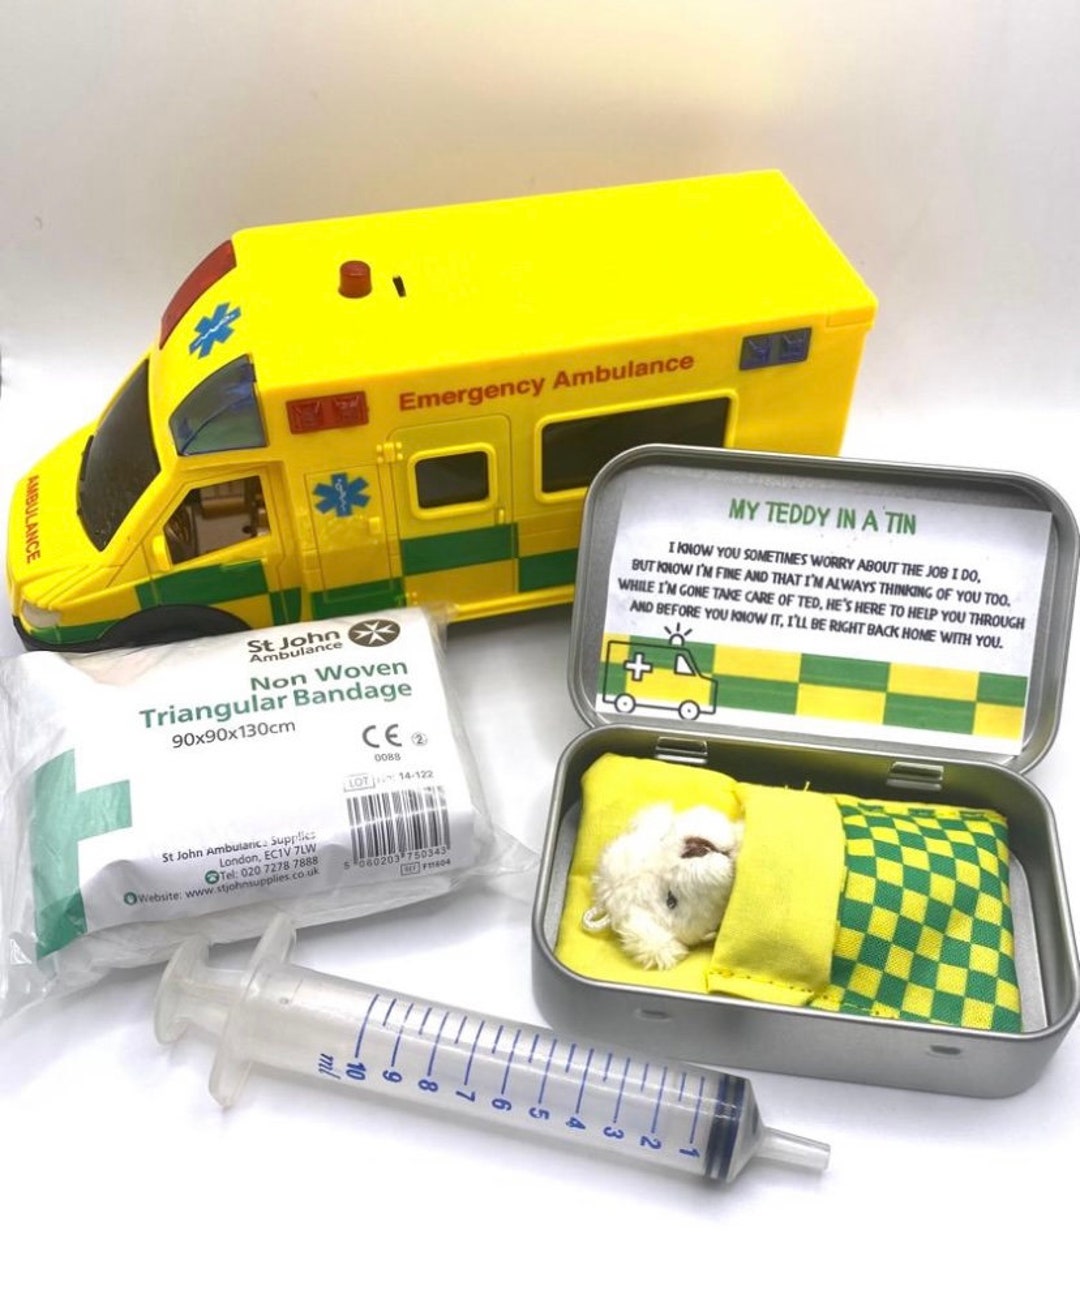 Buy Paramedic Ambulance My Teddy in a Tin TM Services Online in India Etsy